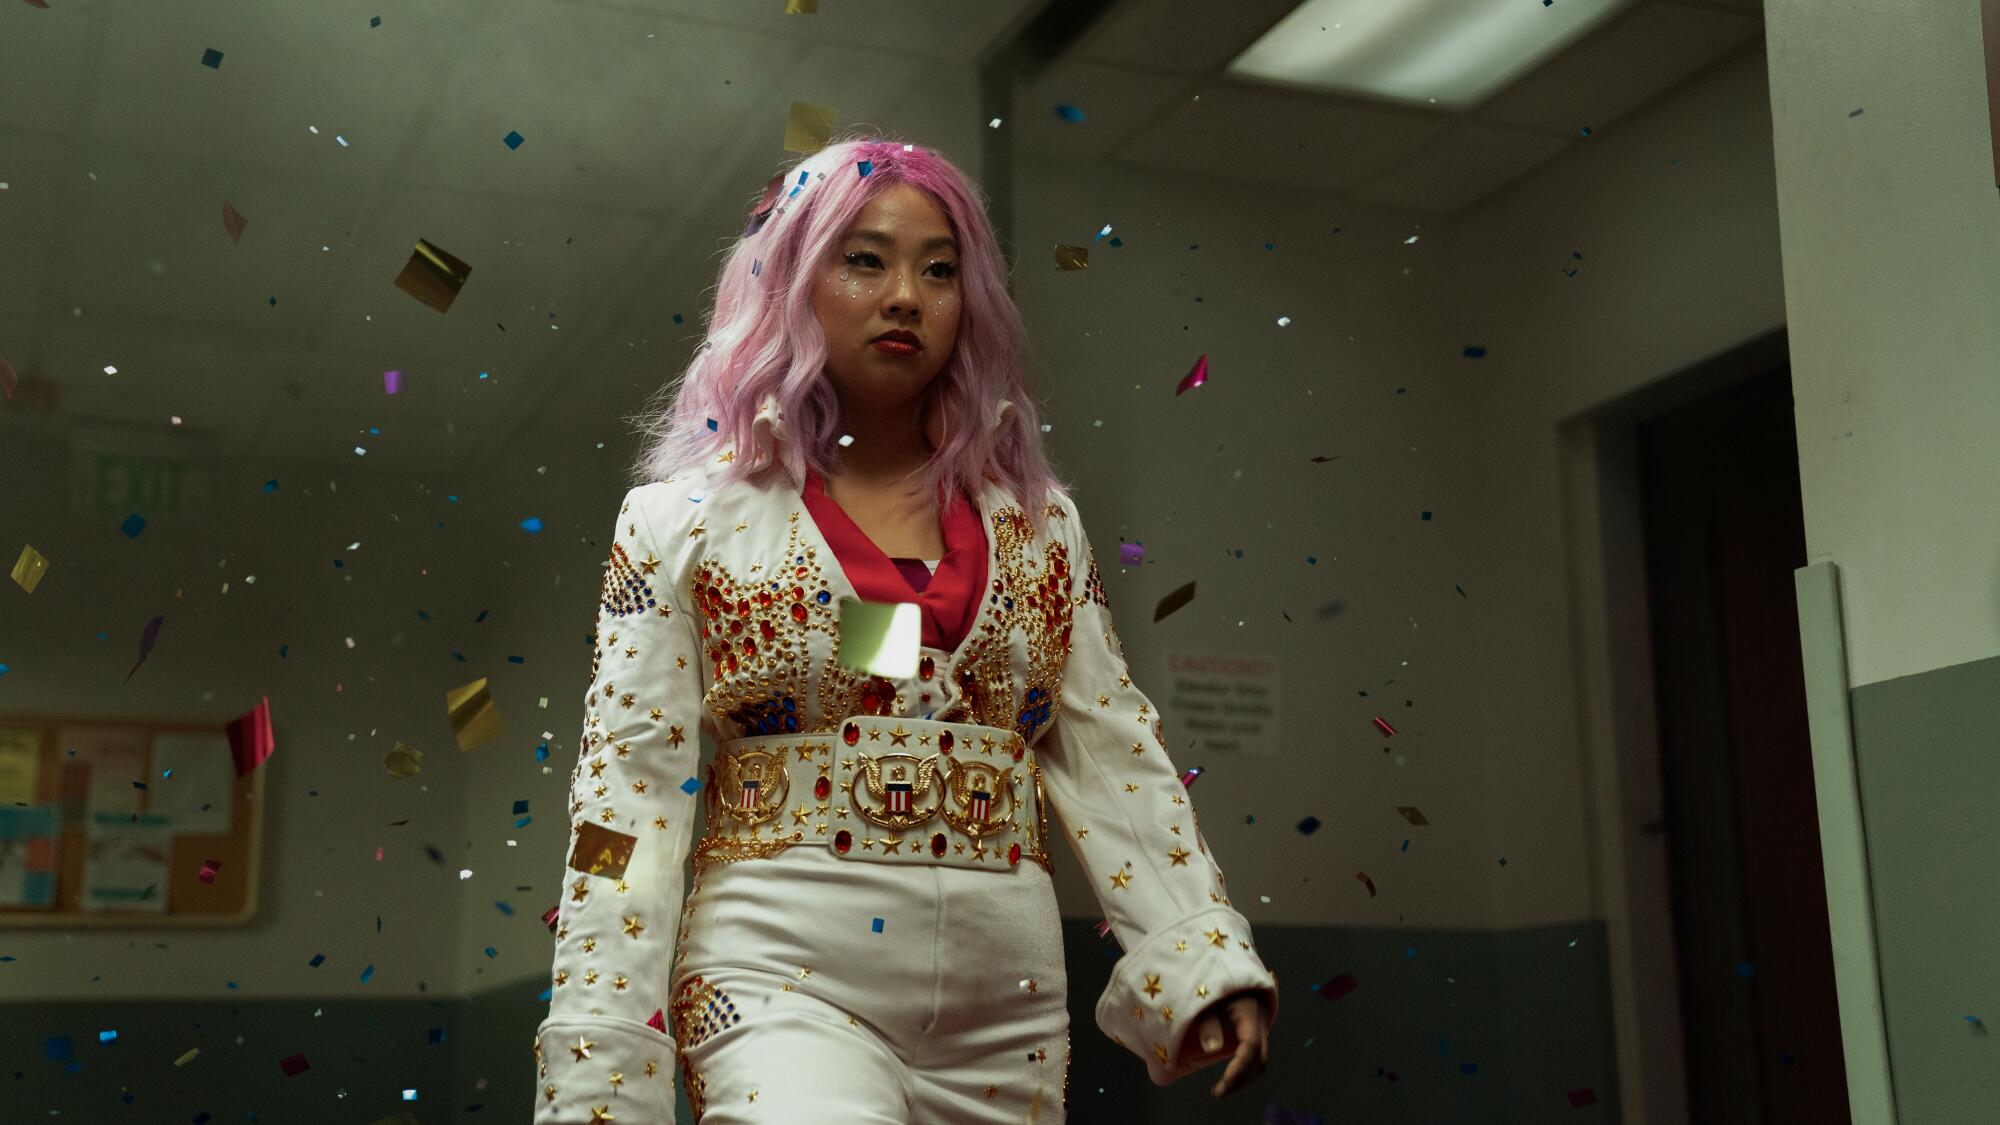 Stephanie Hsu sports pink hair and an "Elvis suit" as Jobu Tupaki in "Everything Everywhere All at Once."